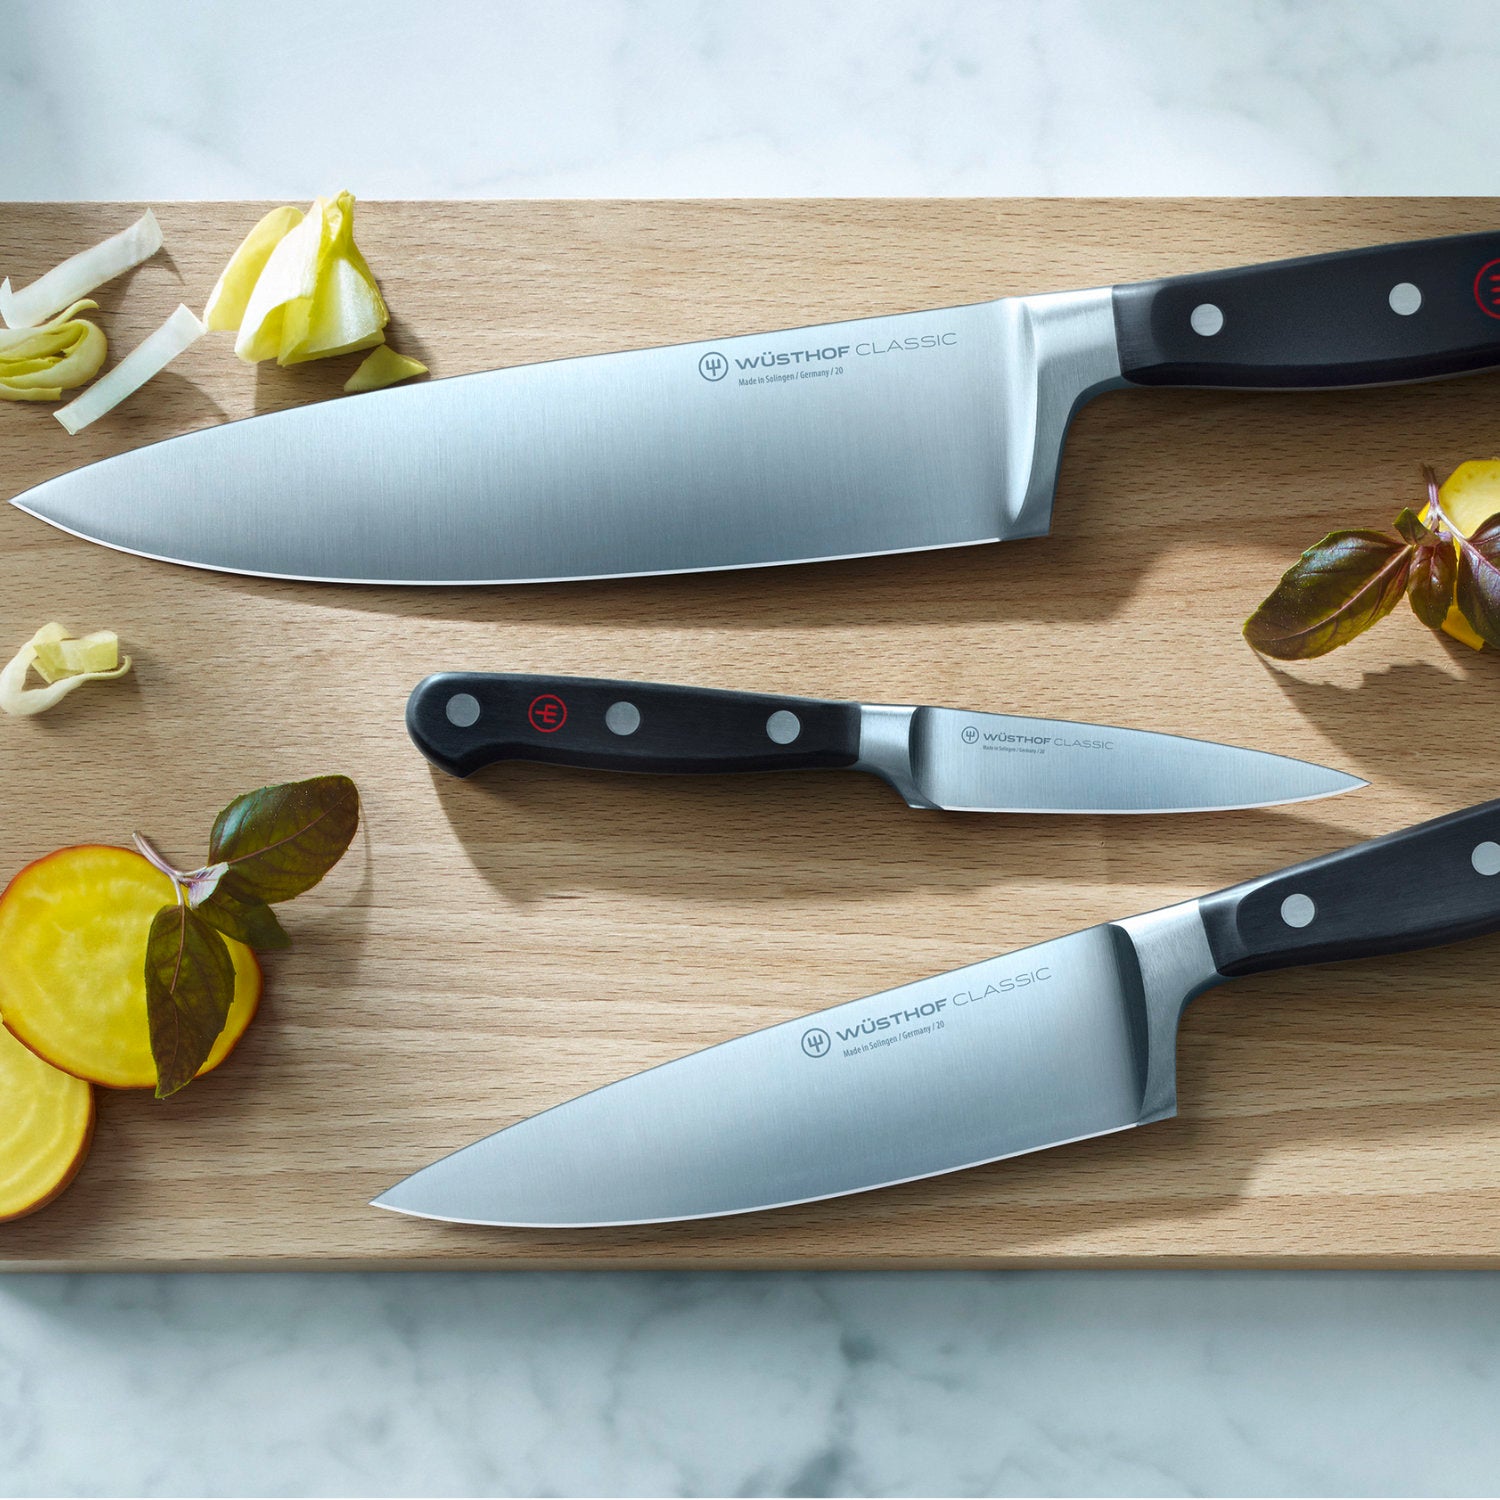 Wusthof-Trident Kitchen Knives at Swiss Knife Shop